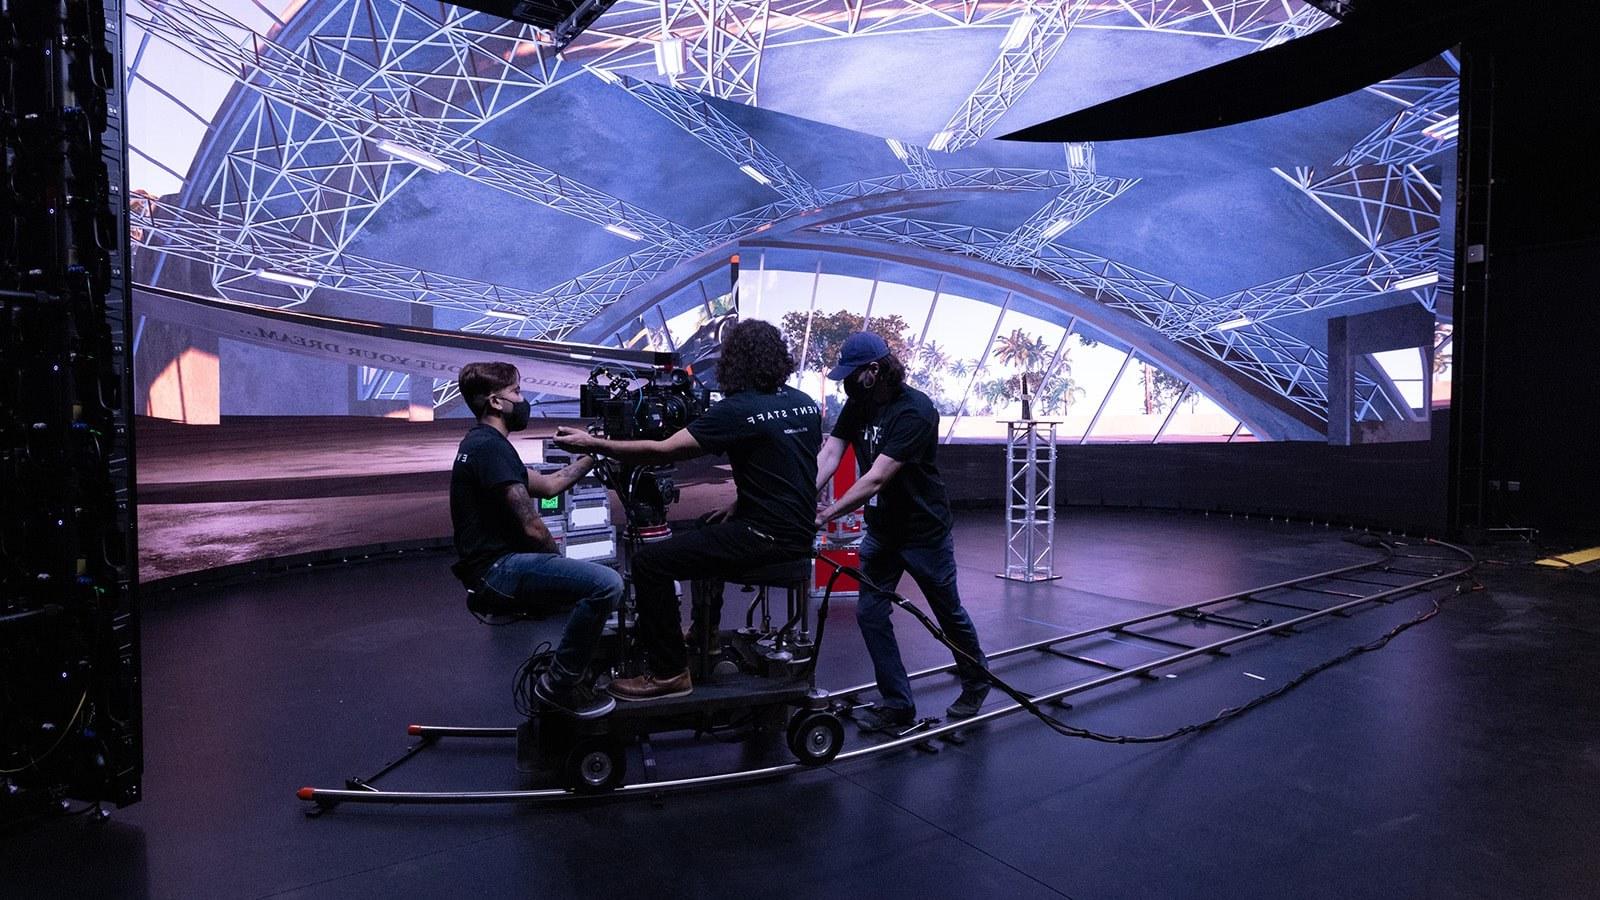 Crew members work on a dolly-mounted camera. A virtual production LED screen displays the interior of an airplane hangar